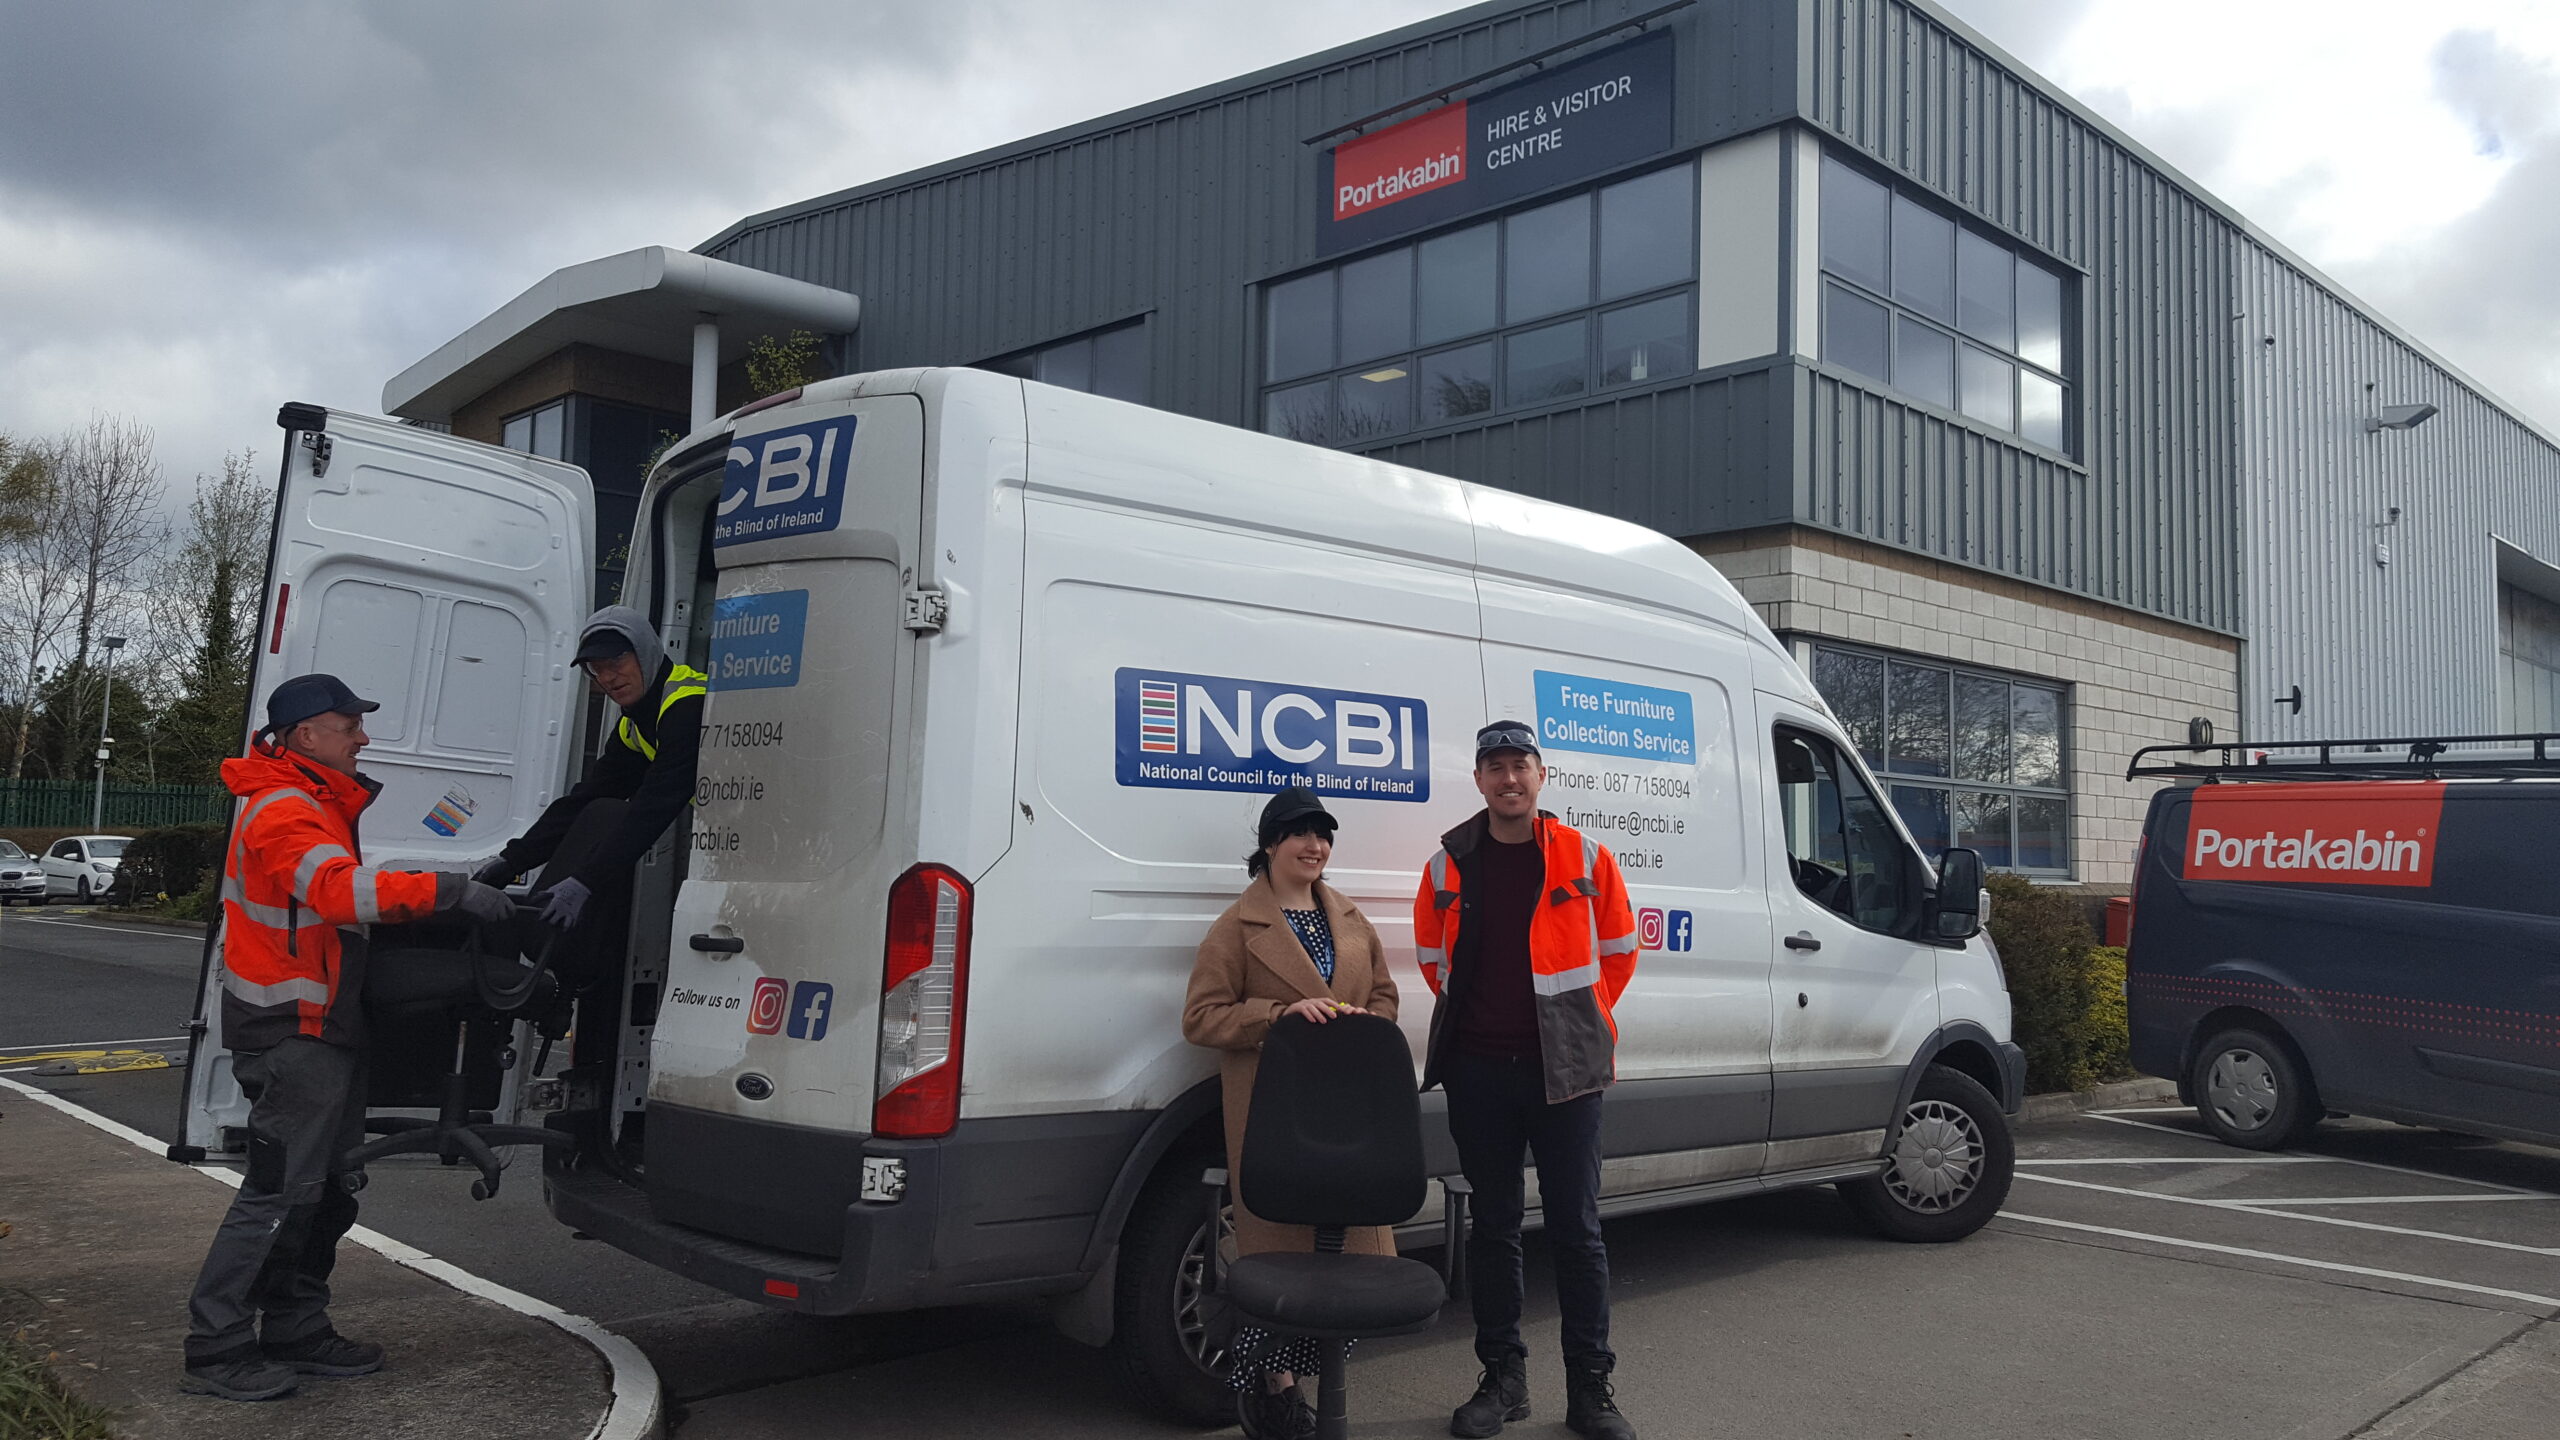 A representative from Portakabin and representatives from NCBI stand in front of a white NCBI van as they accept a donation of furniture from the company, some of which is being loaded into the back of the van